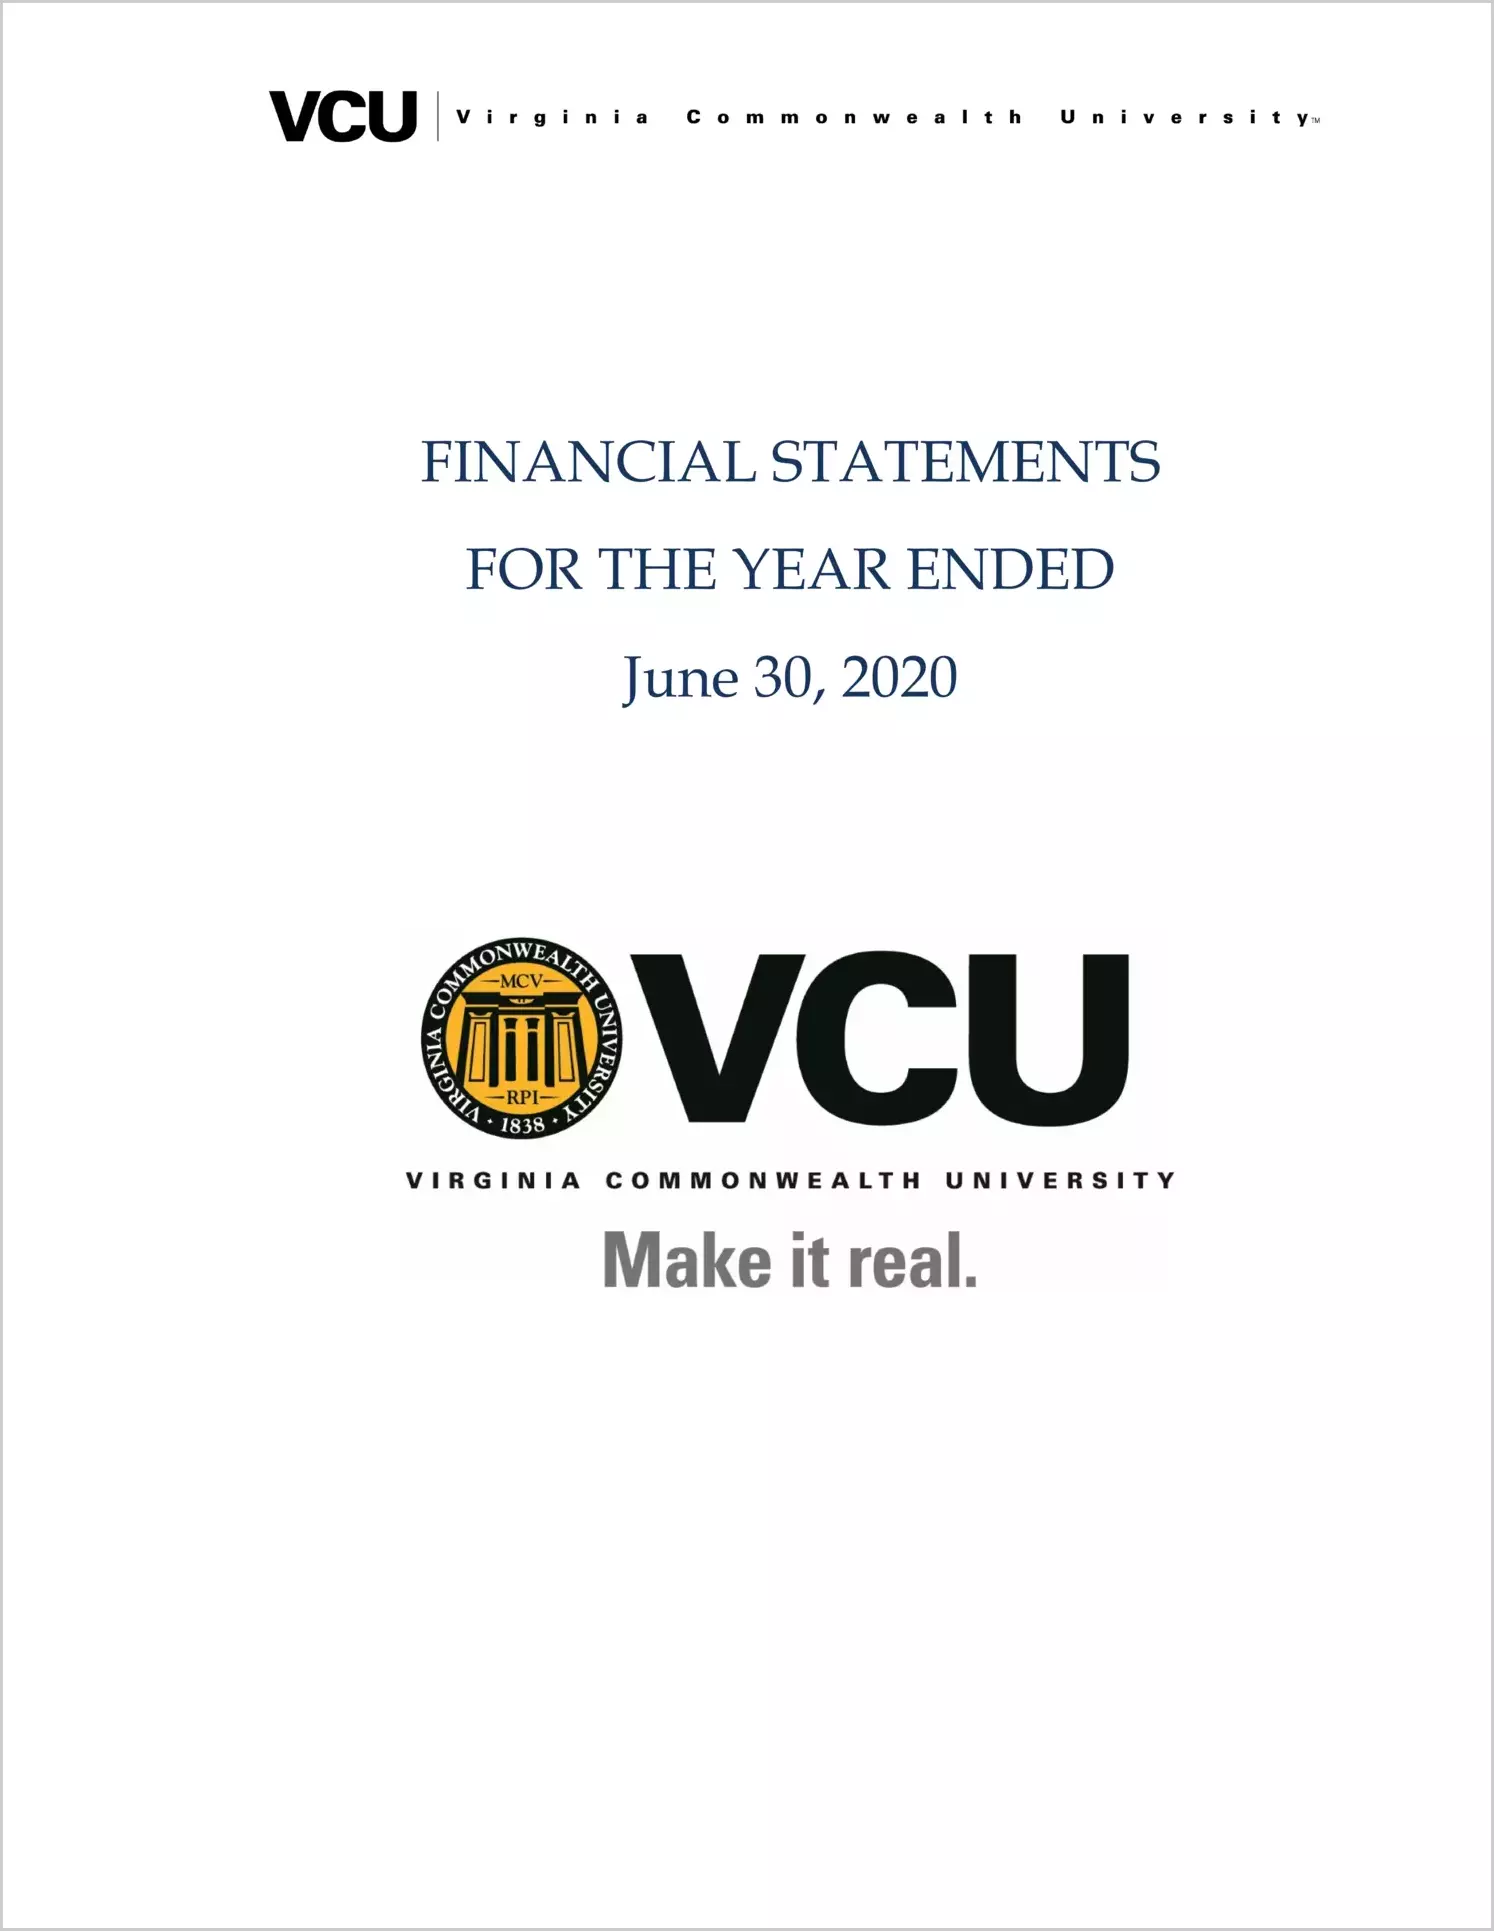 Virginia Commonwealth University Financial Statements for the year ended June 30, 2020